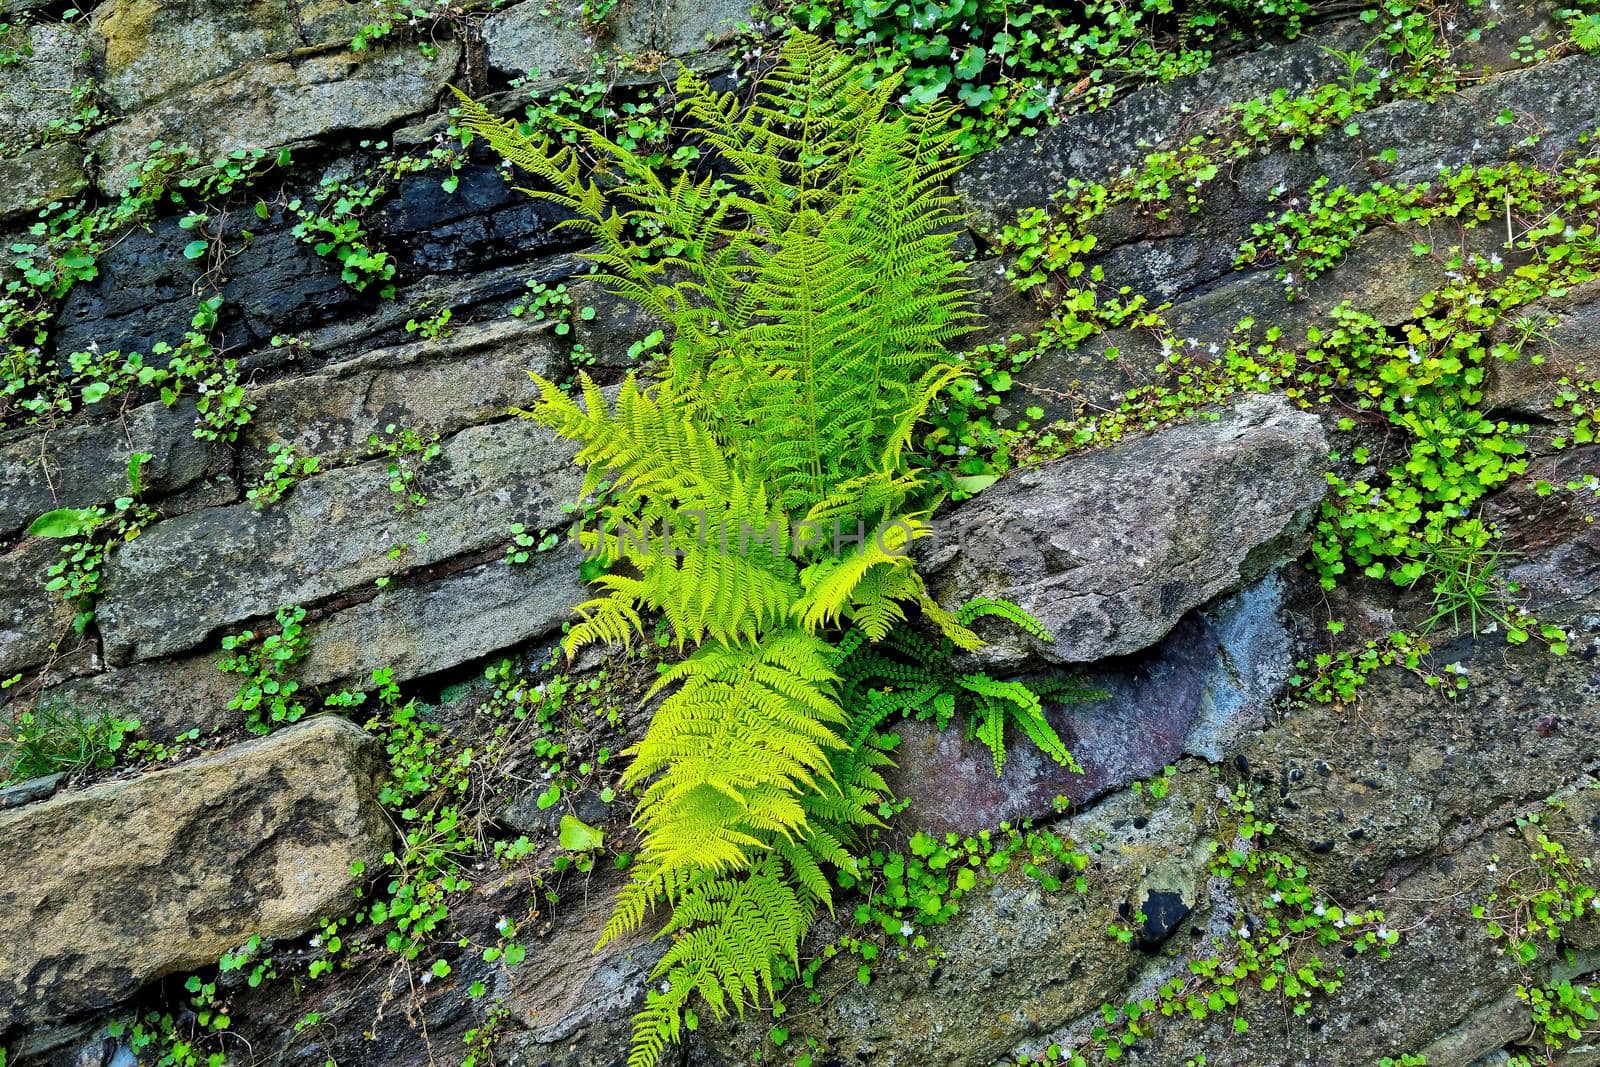 A green young fern grows from a stone or rock